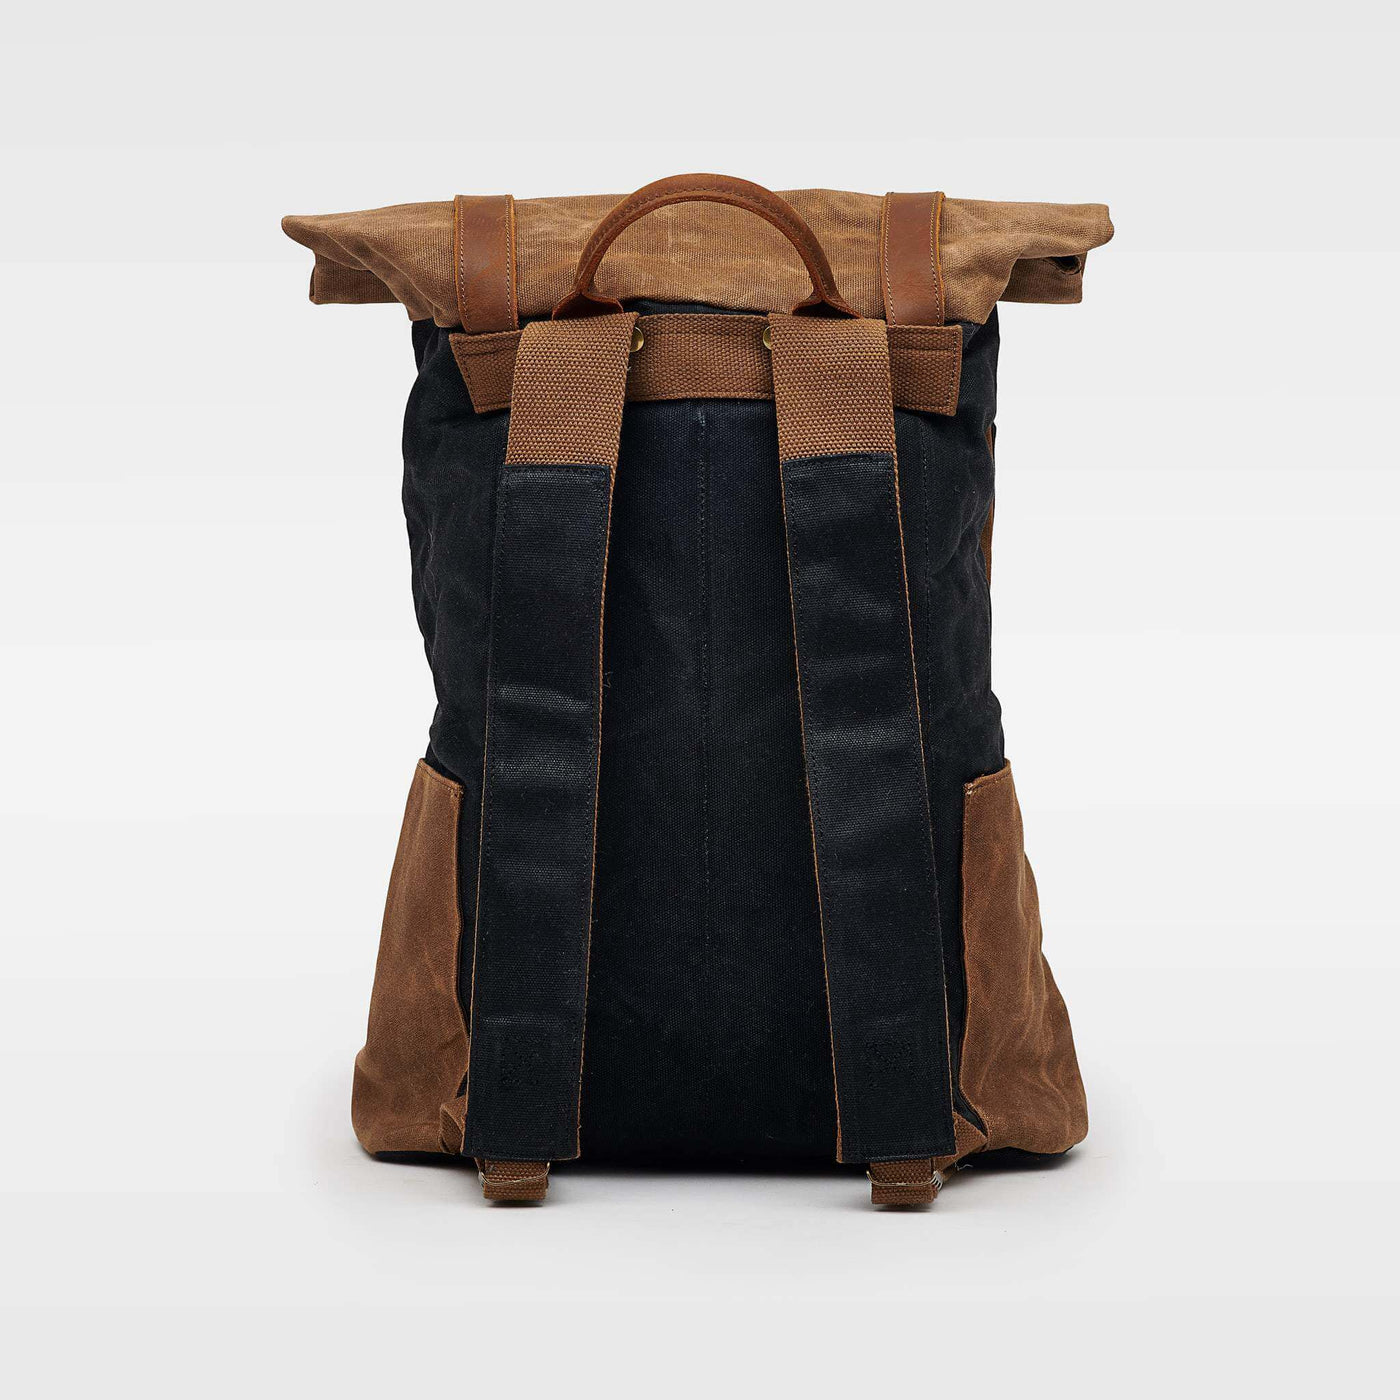 Rolltop Waxed Canvas Bag With a Laptop Slot. Canvas Travel